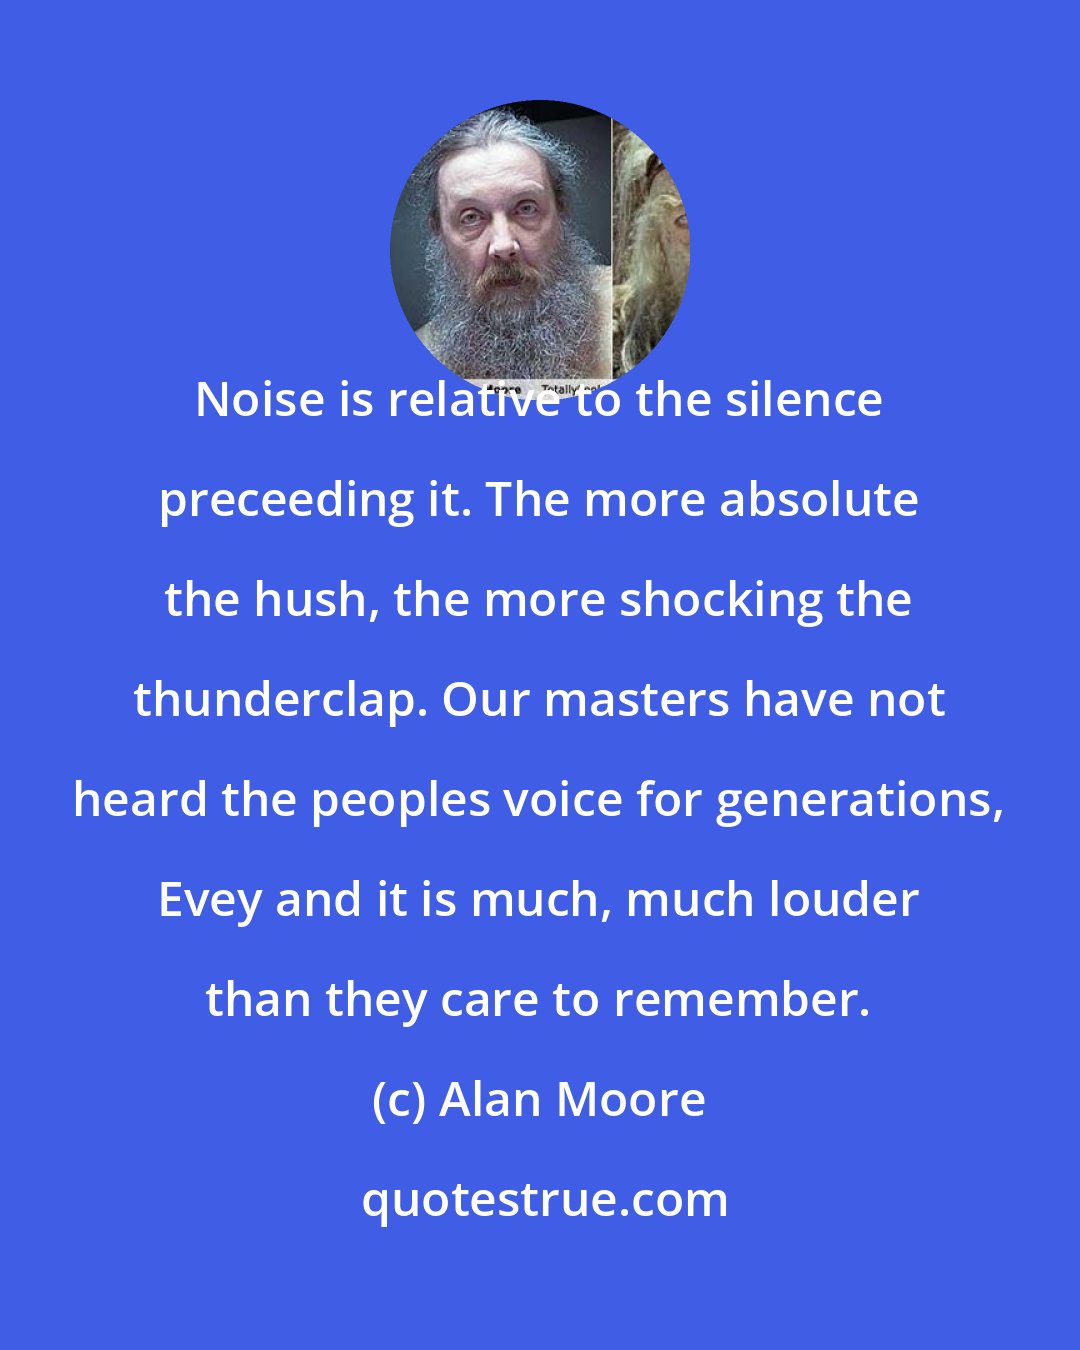 Alan Moore: Noise is relative to the silence preceeding it. The more absolute the hush, the more shocking the thunderclap. Our masters have not heard the peoples voice for generations, Evey and it is much, much louder than they care to remember.